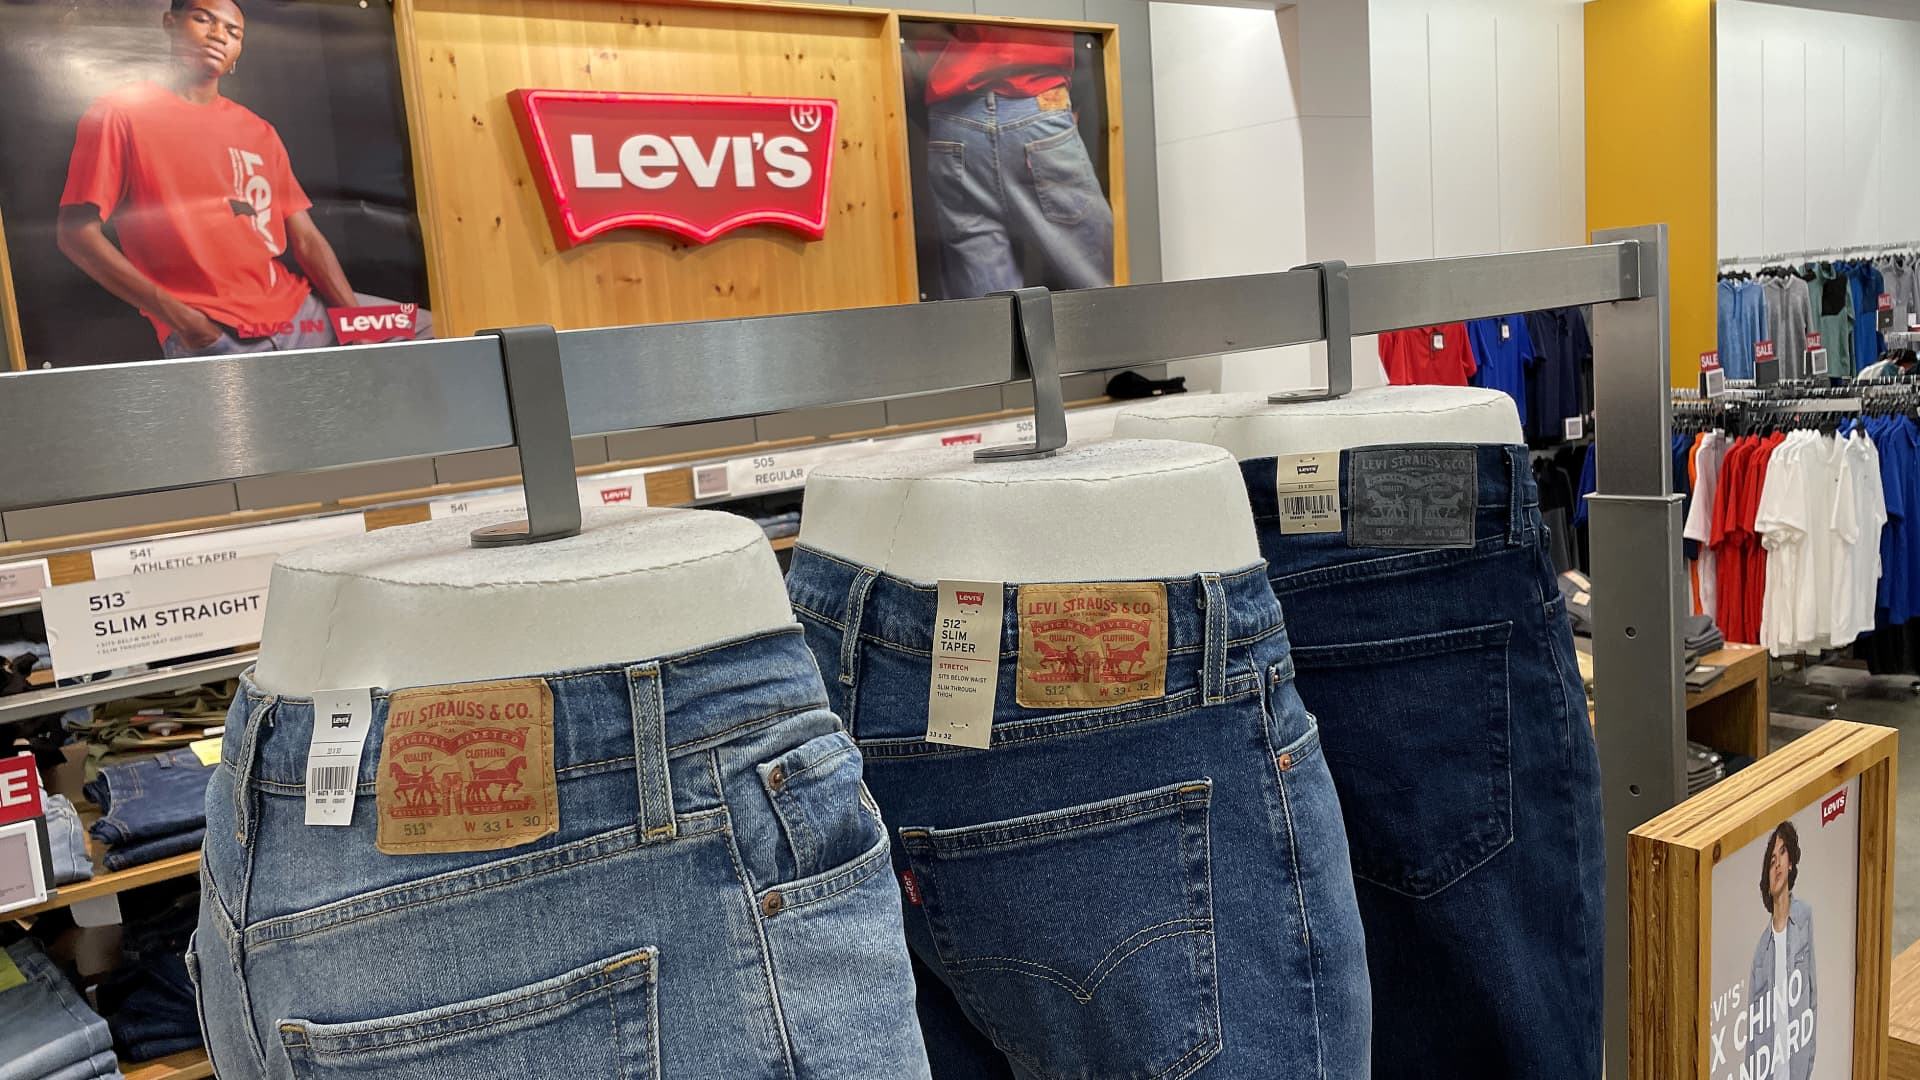 Nearly half of Levi's sales are happening online and in its shops, a shift as department stores fade